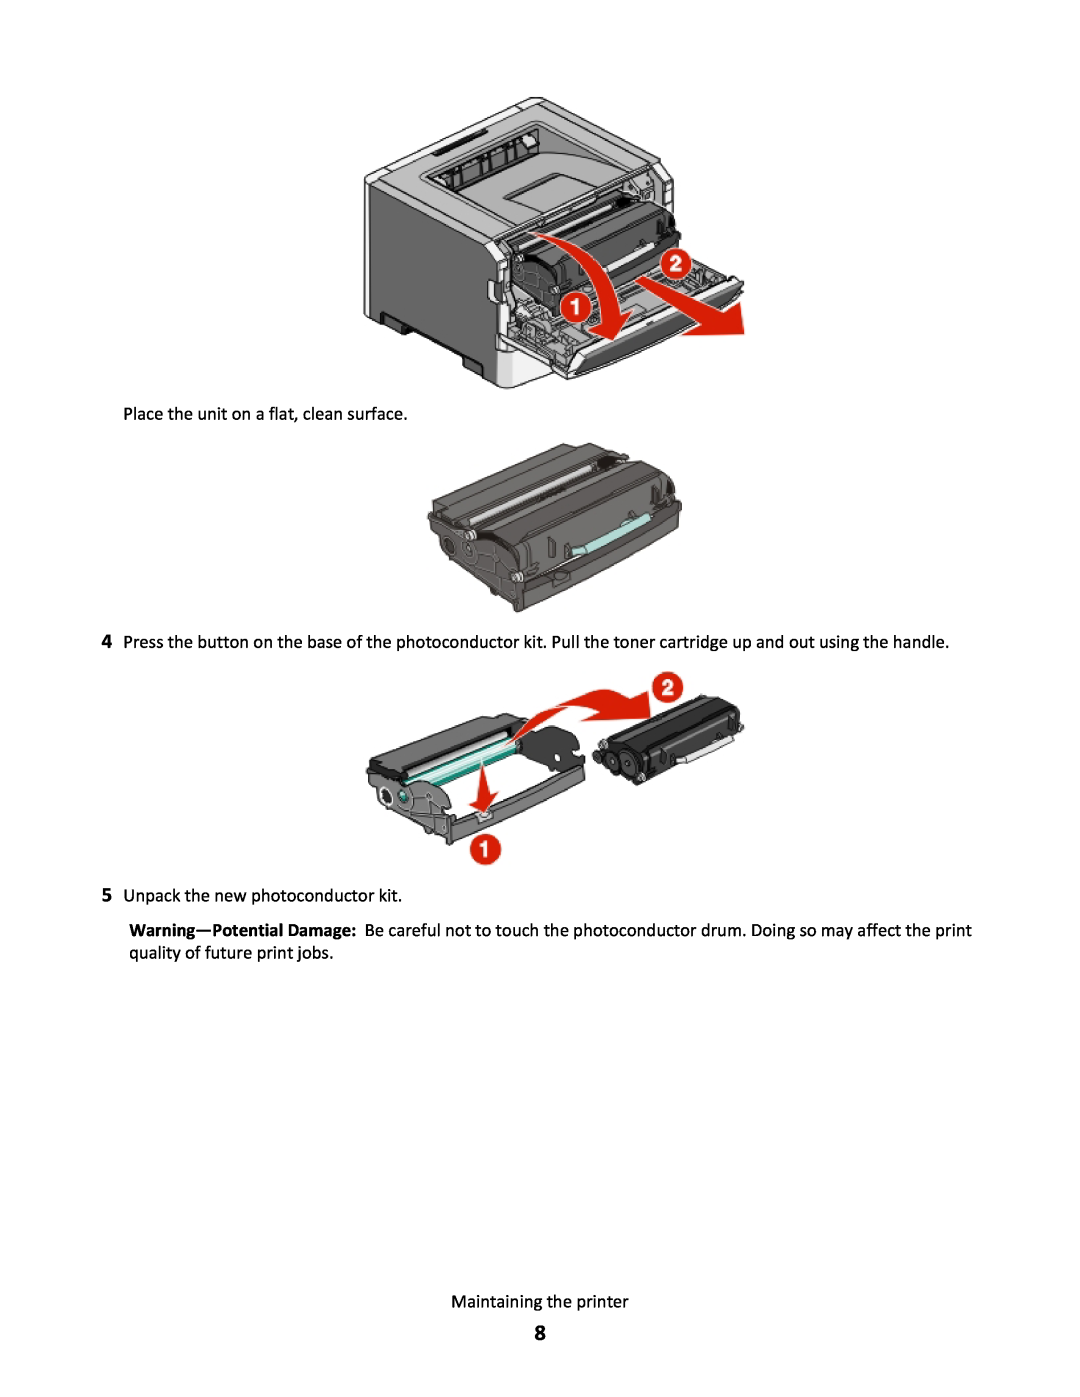 Lexmark 34S0700 manual Place the unit on a flat, clean surface, Unpack the new photoconductor kit, Maintaining the printer 